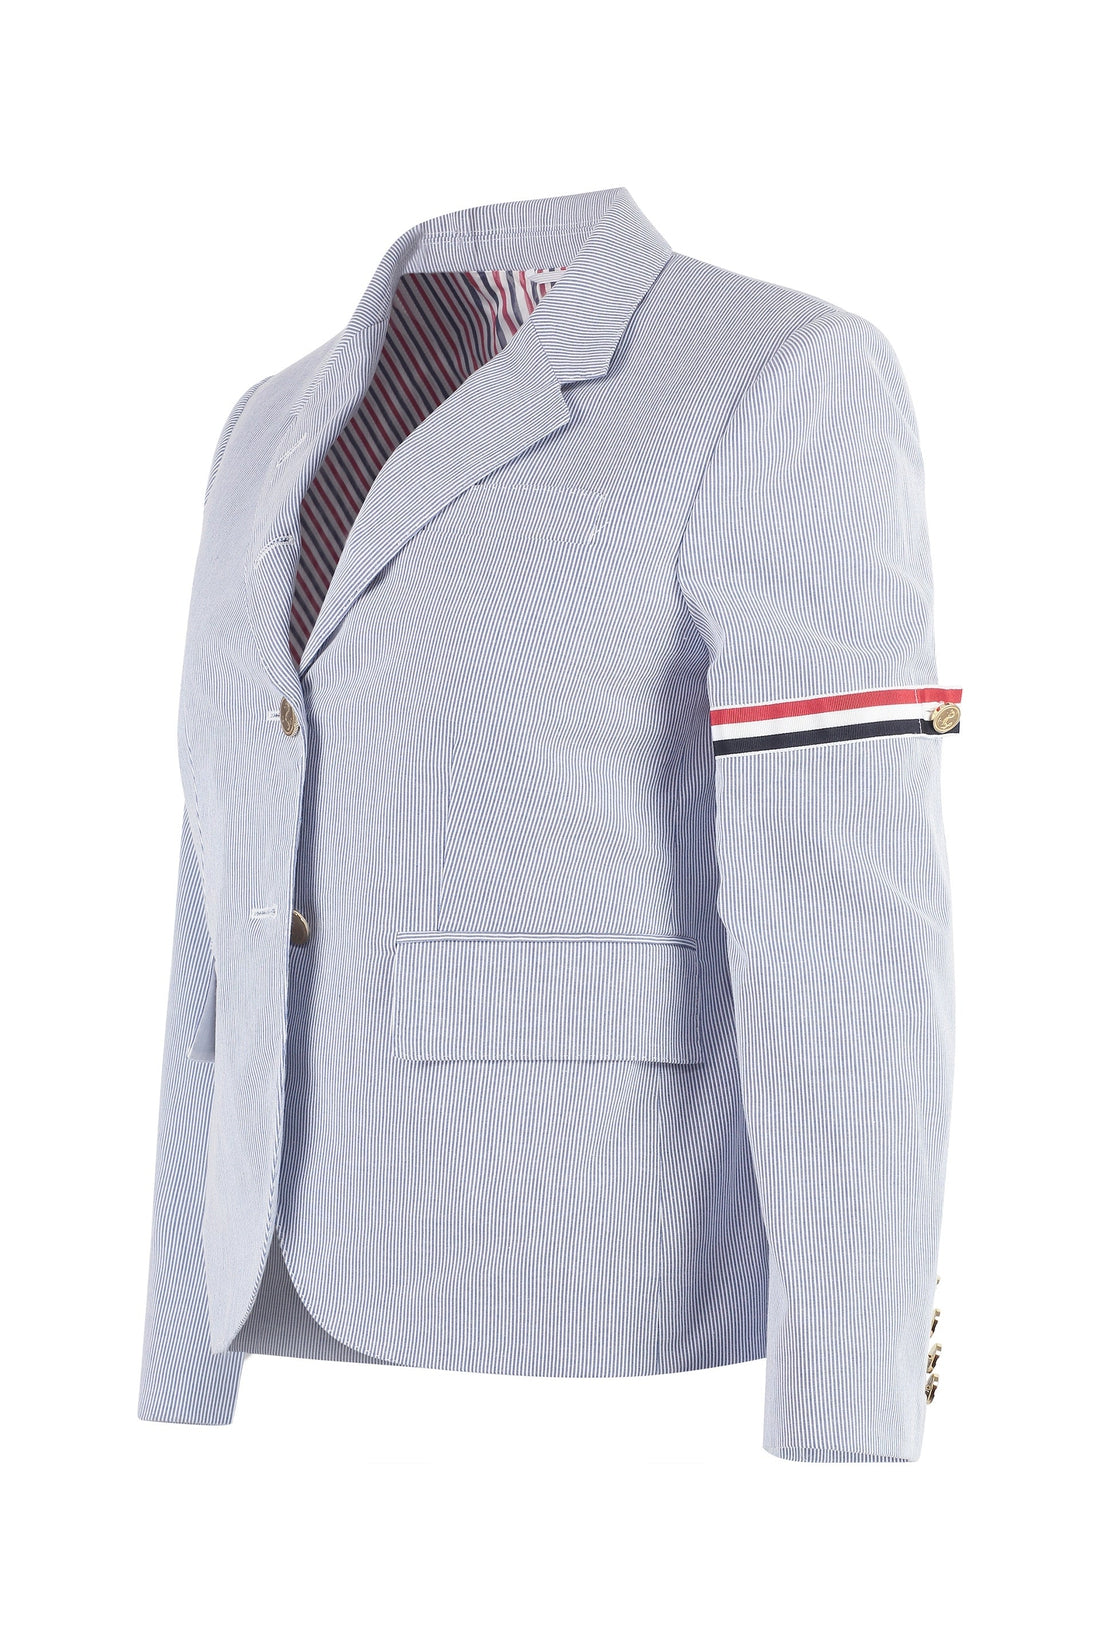 Thom Browne-OUTLET-SALE-Single-breasted two-button blazer-ARCHIVIST